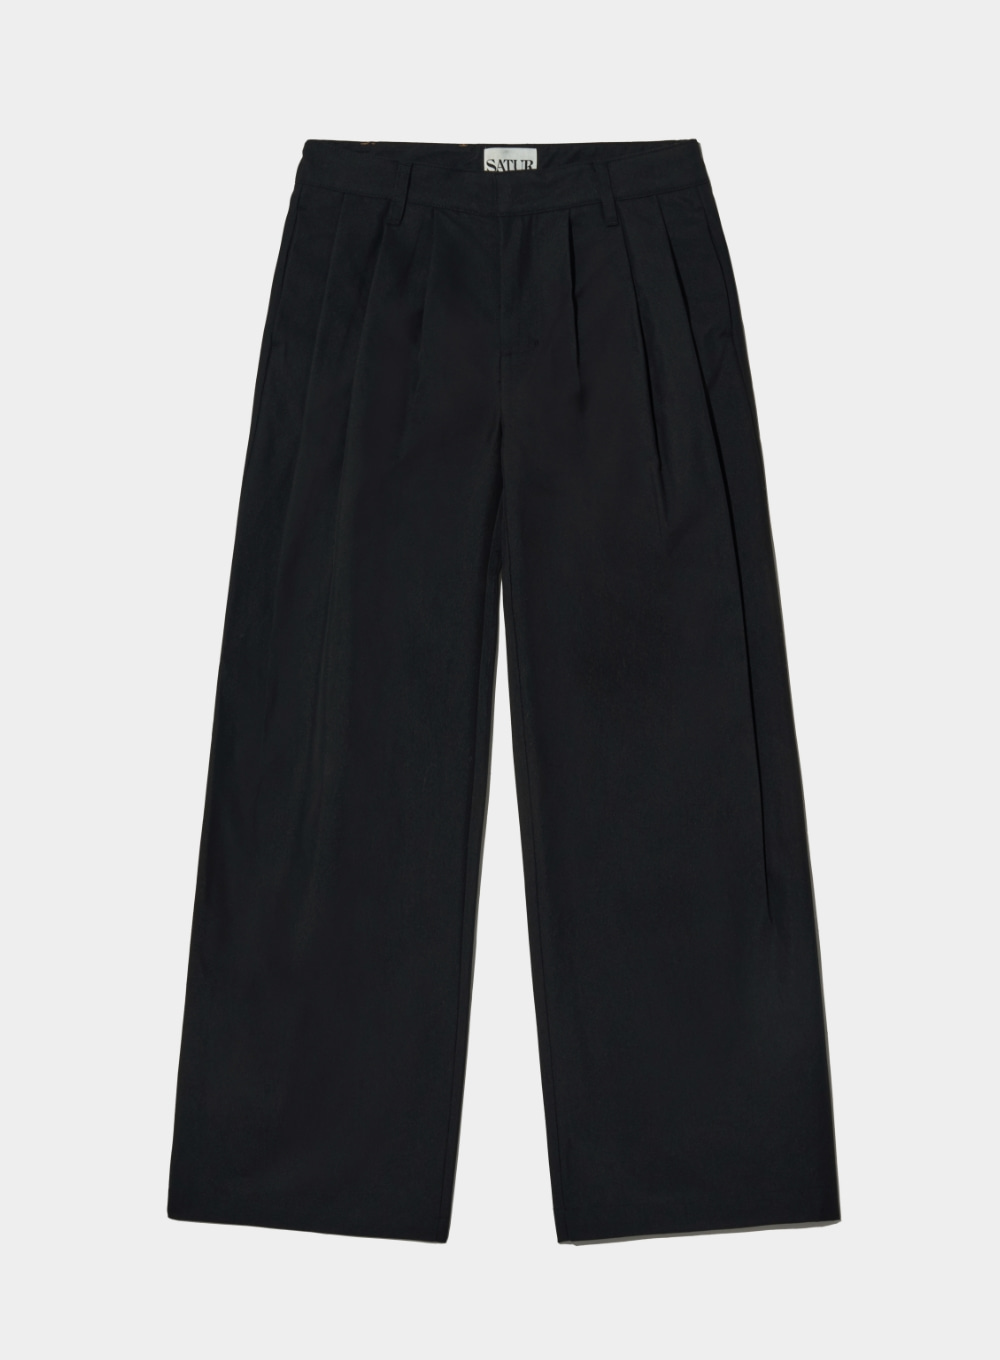 (W) Bliss 3-Tuck Wide Chino Pants - Classic Black